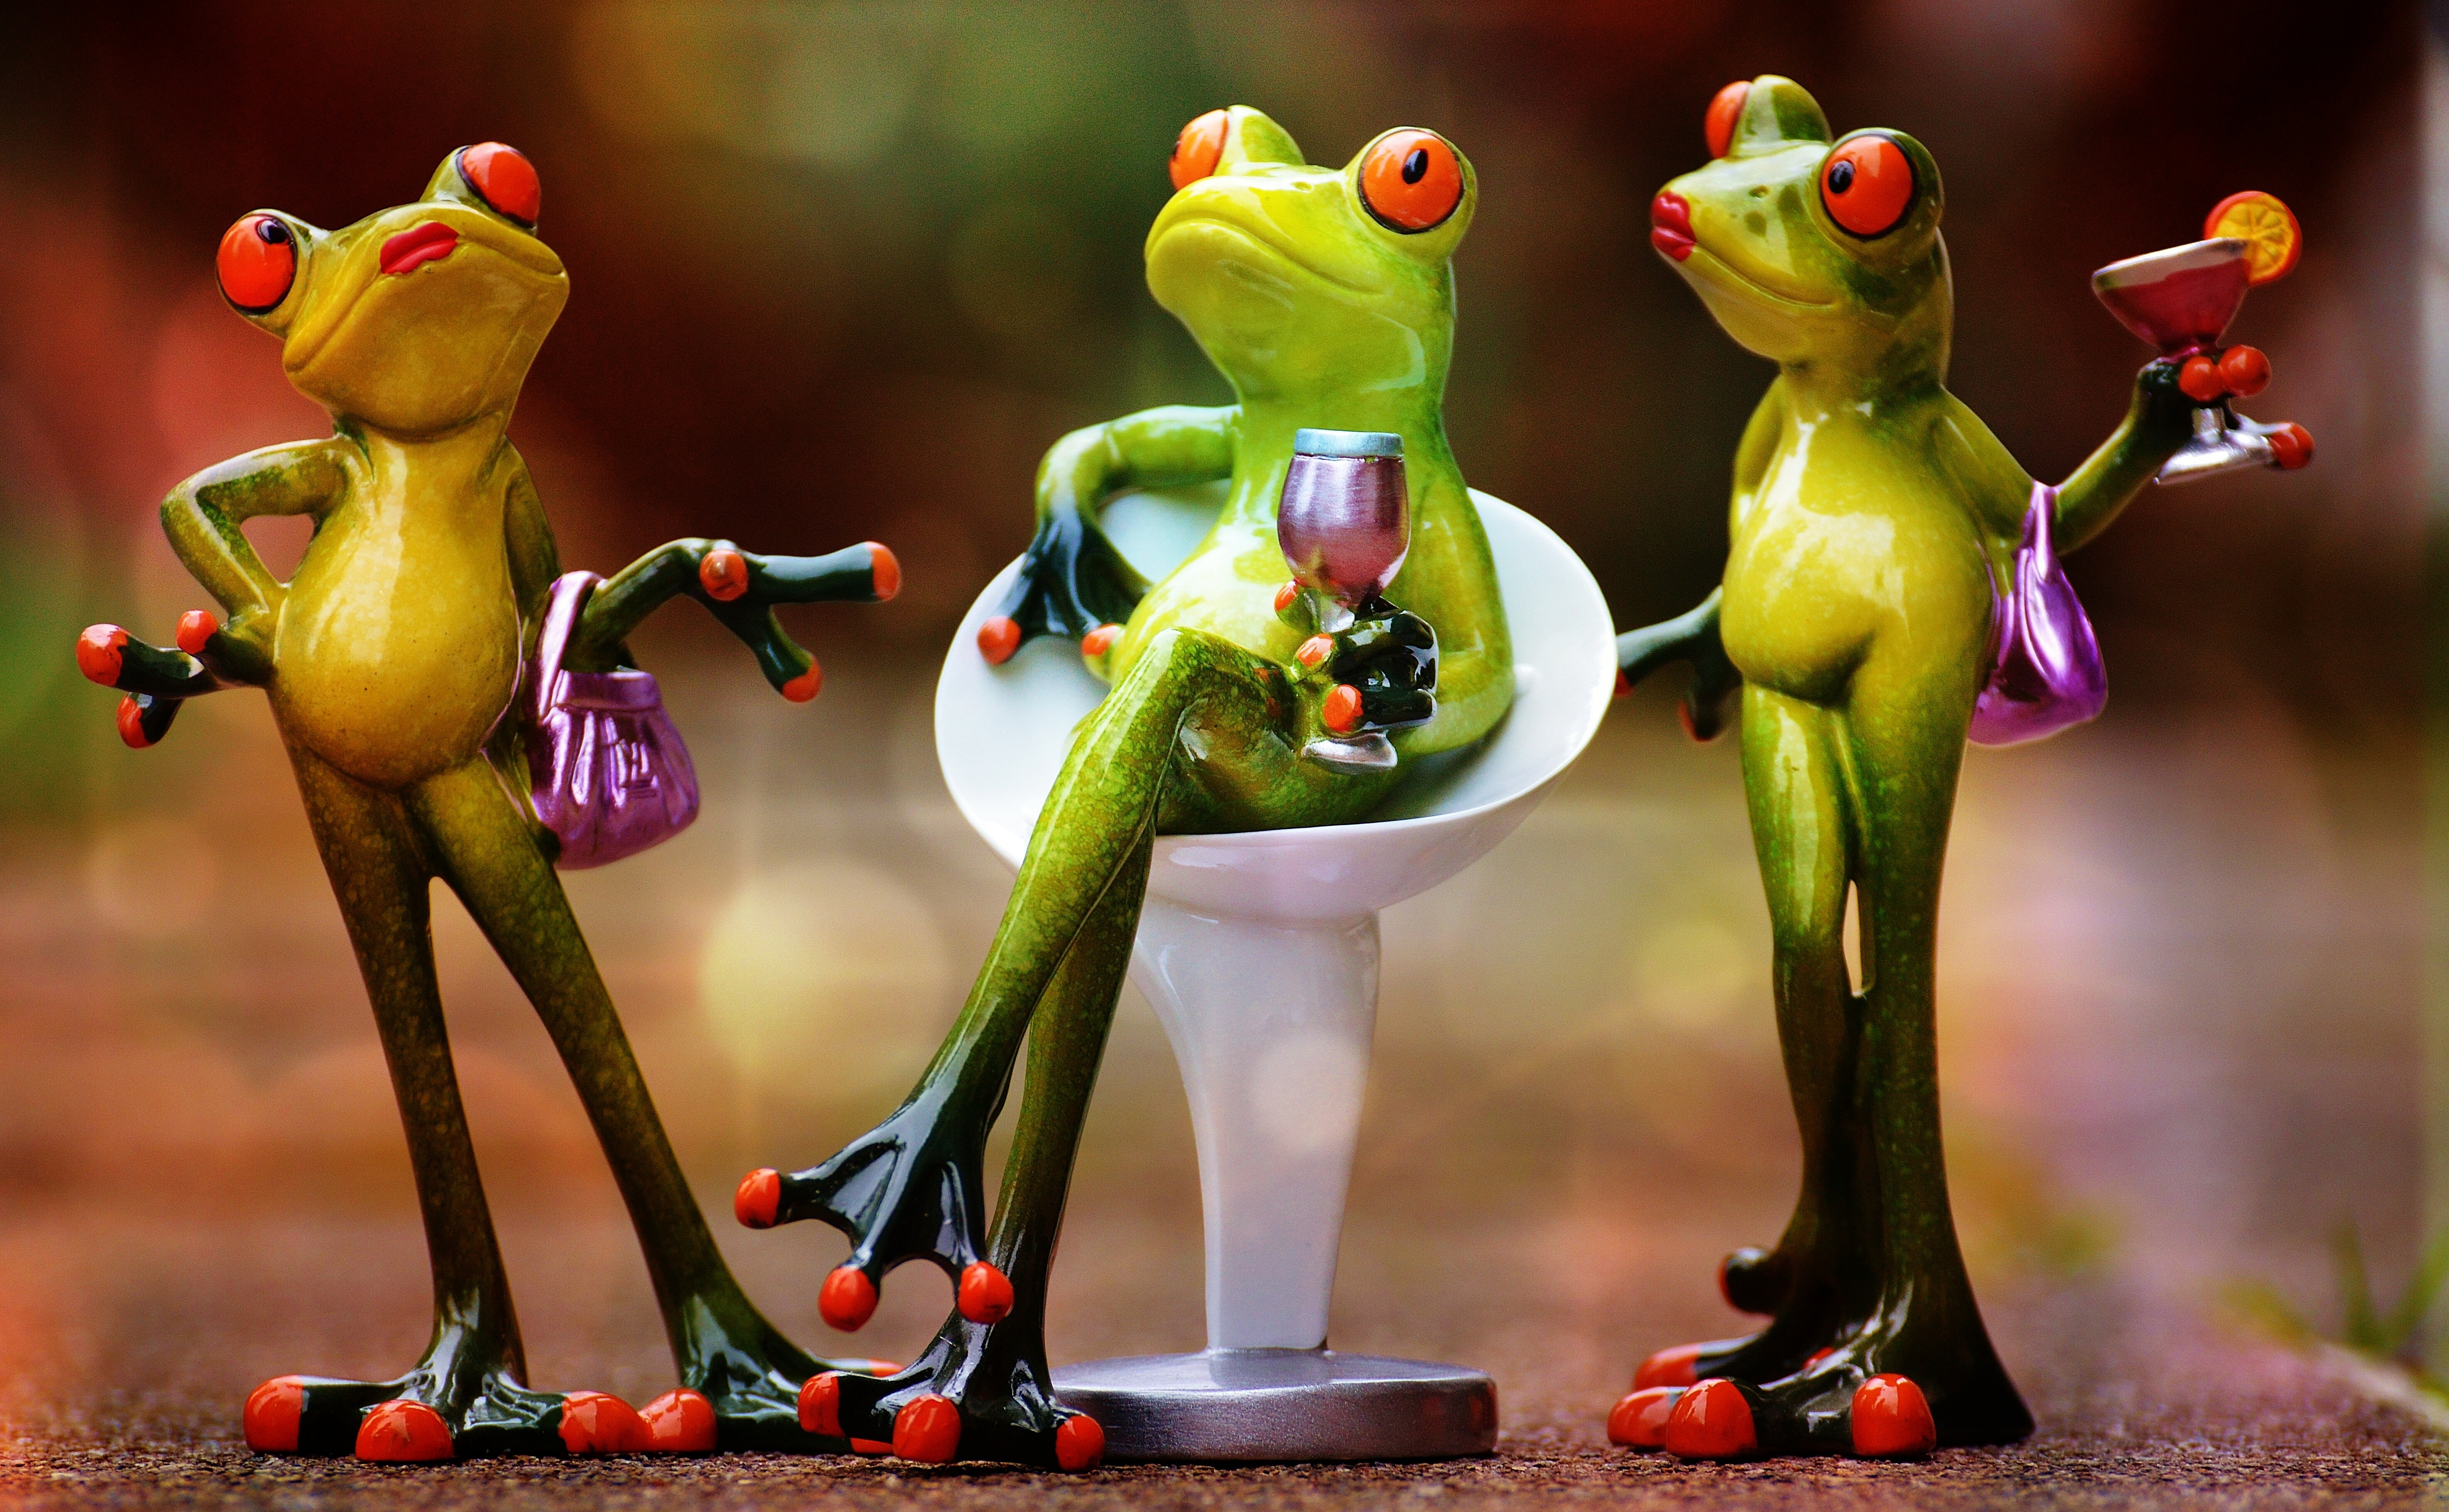 Frogs, Drink, Celebrate, Funny, Party, figurine, no people